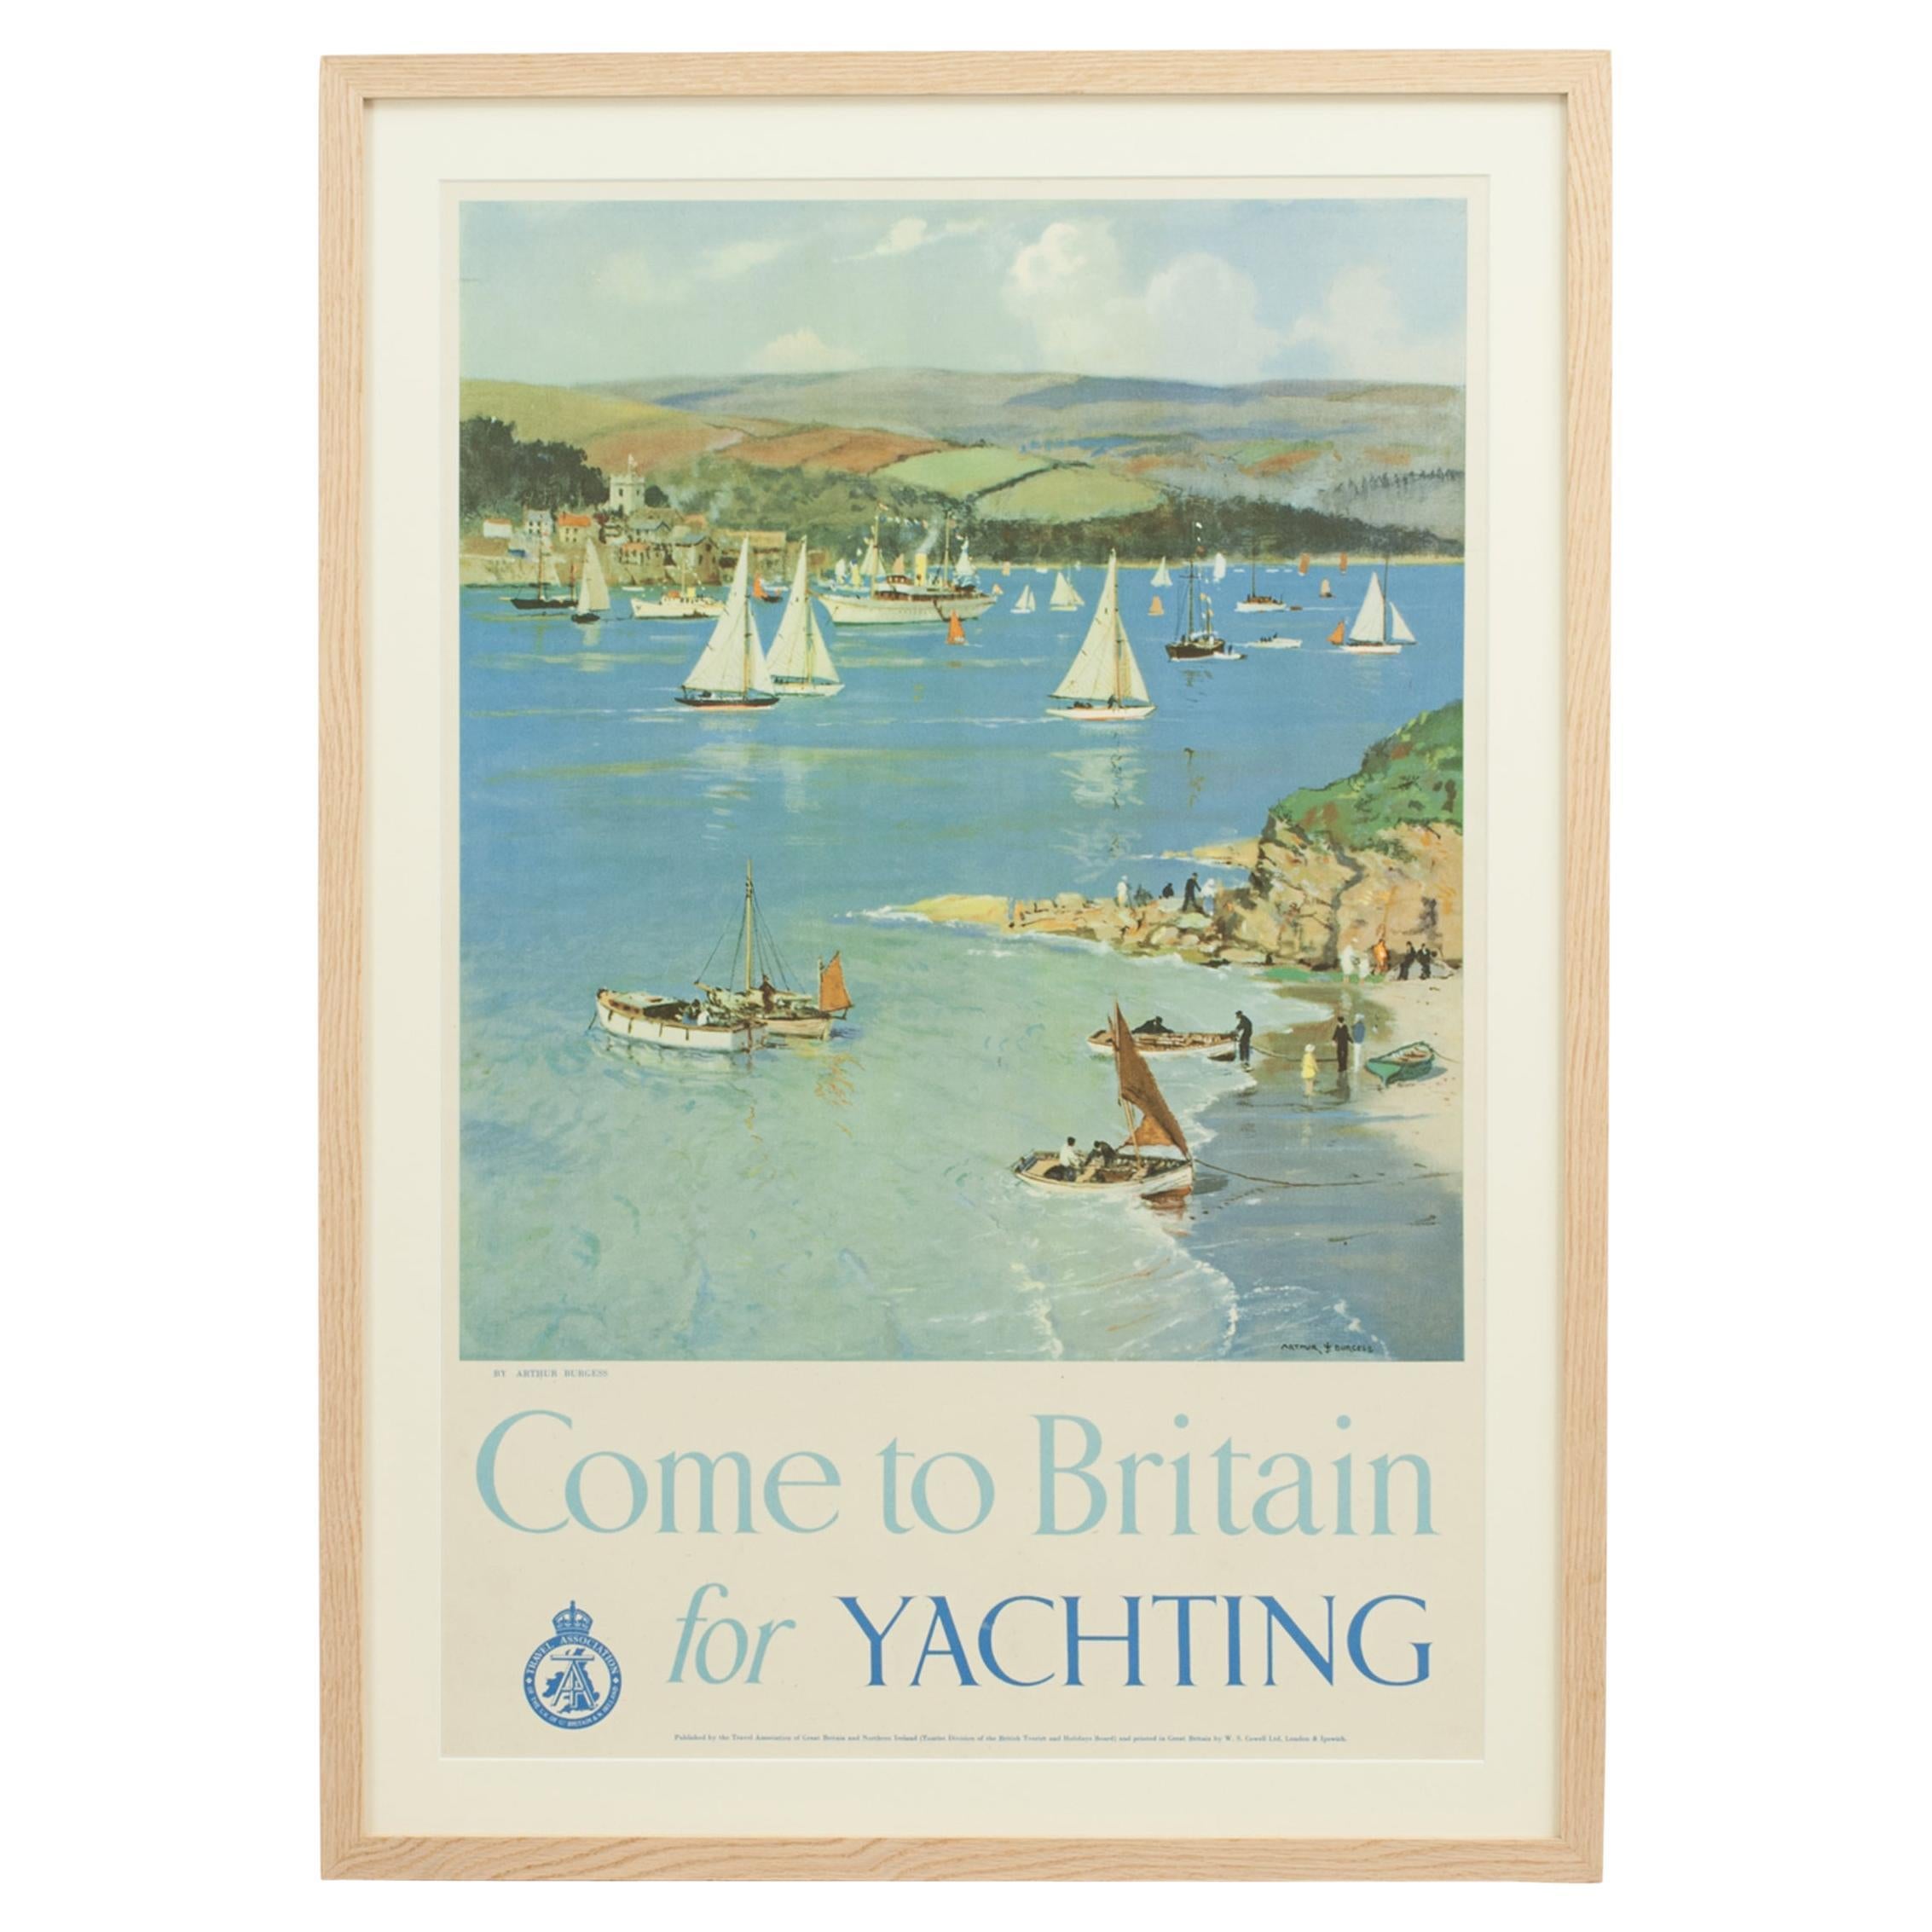 Vintage Travel Poster, Come To Britain For Yachting